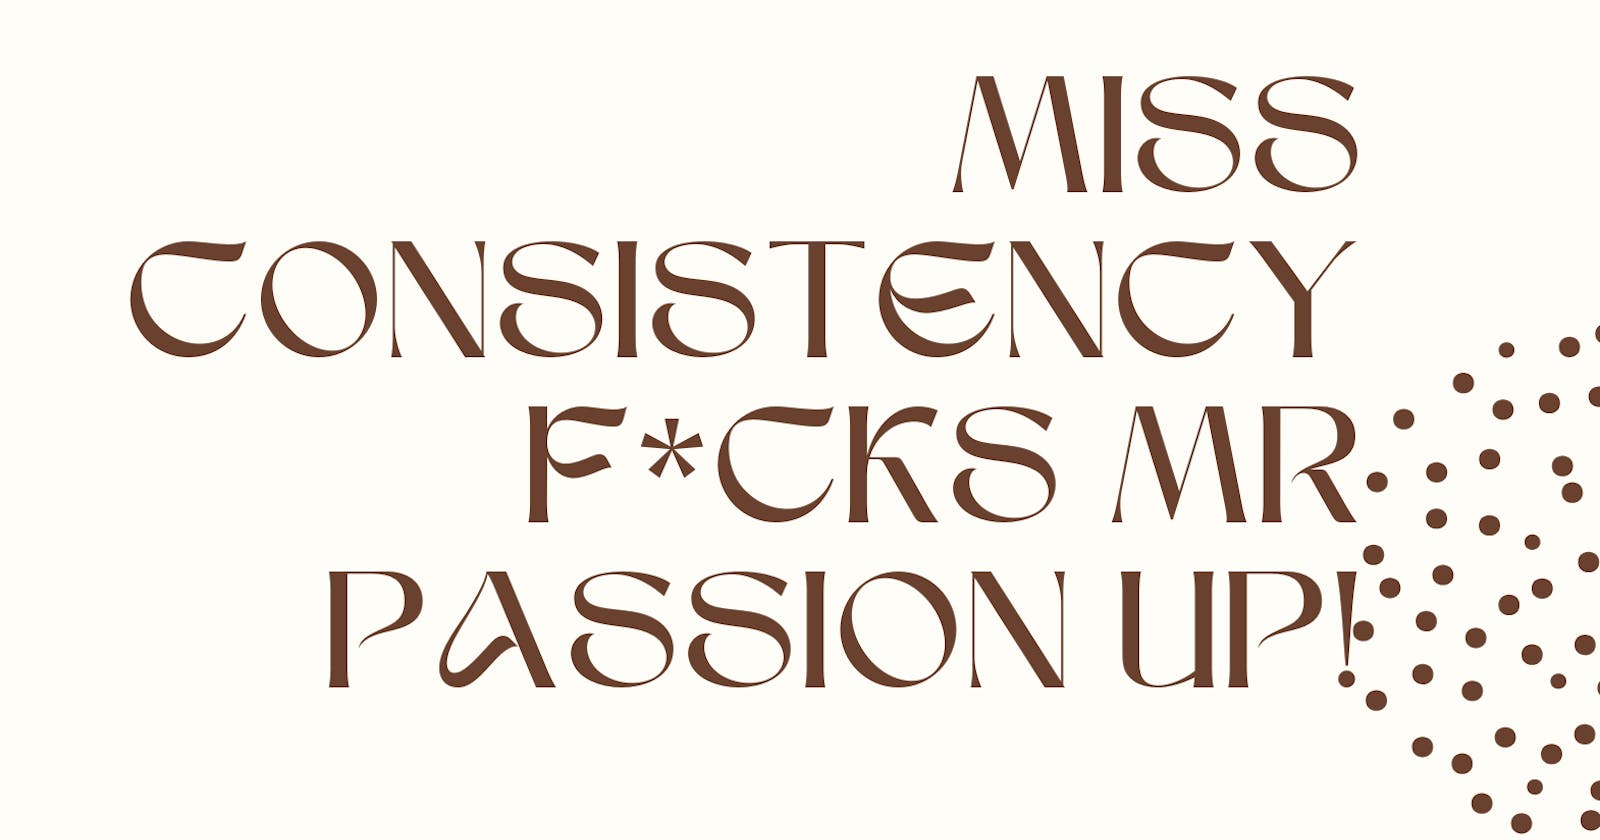 Miss Consistency F*cks Mr Passion up!